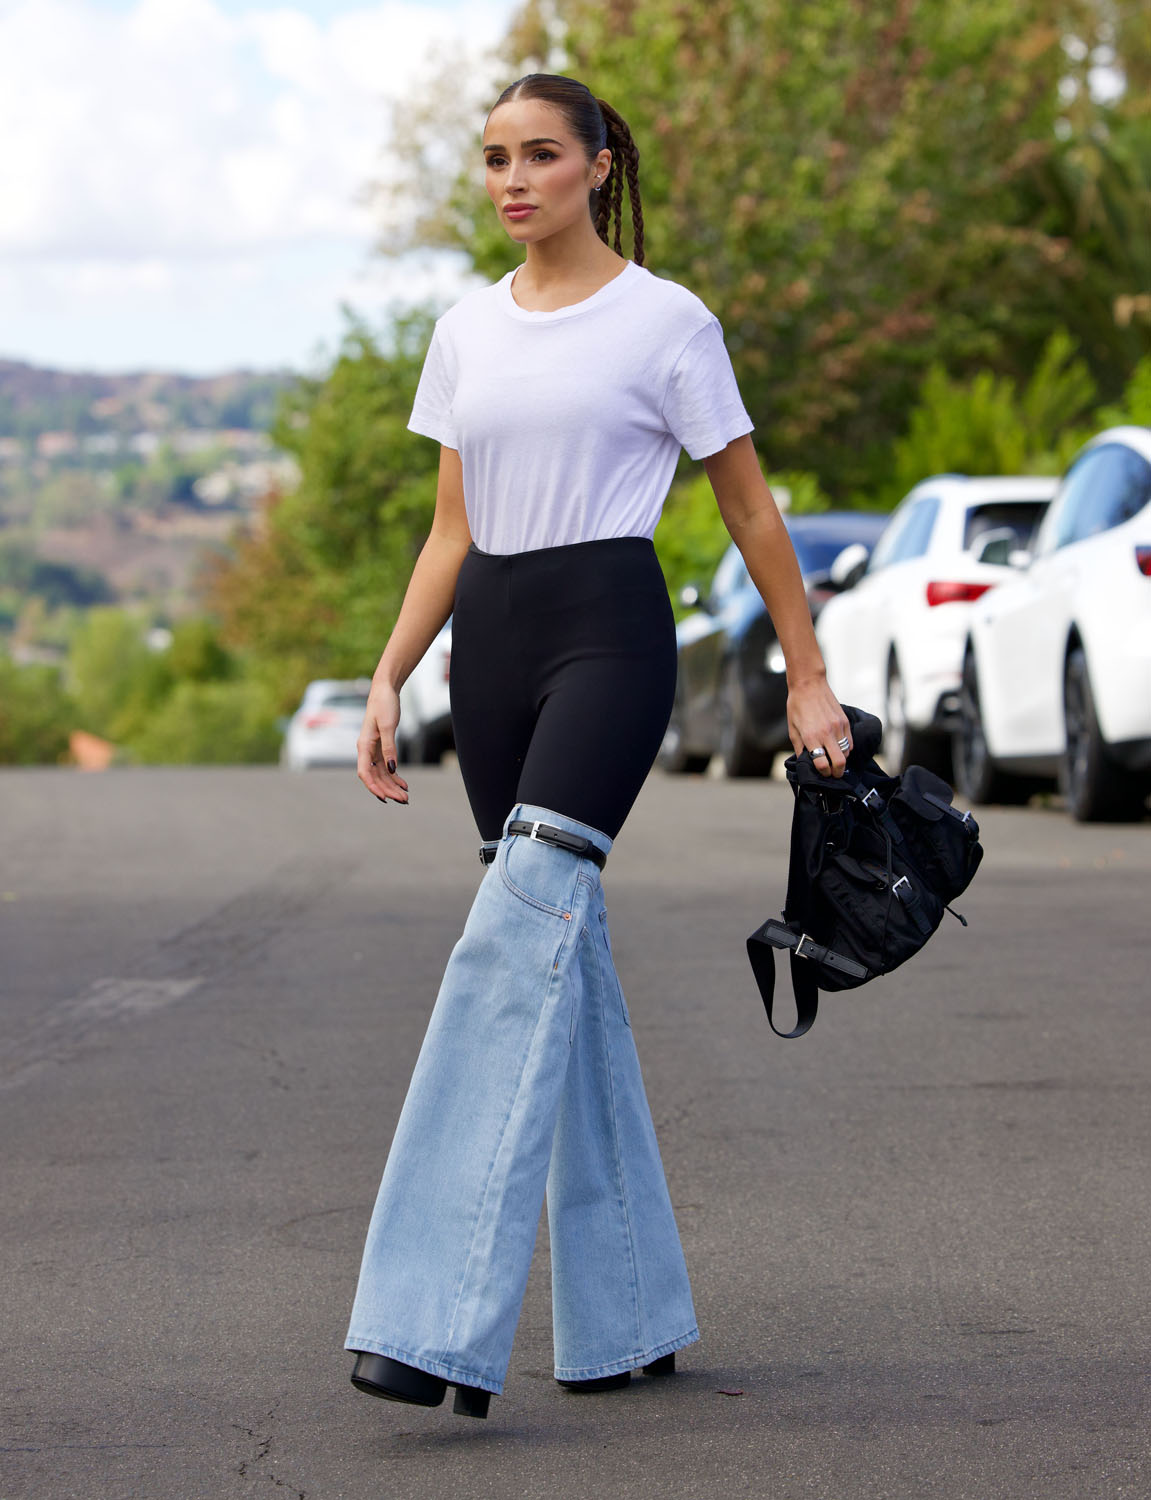 A Severe Case of Pants Madness Has Afflicted Olivia Culpo - Go Fug Yourself  - A Severe Case of Pants Madness Has Afflicted Olivia Culpo Go Fug Yourself